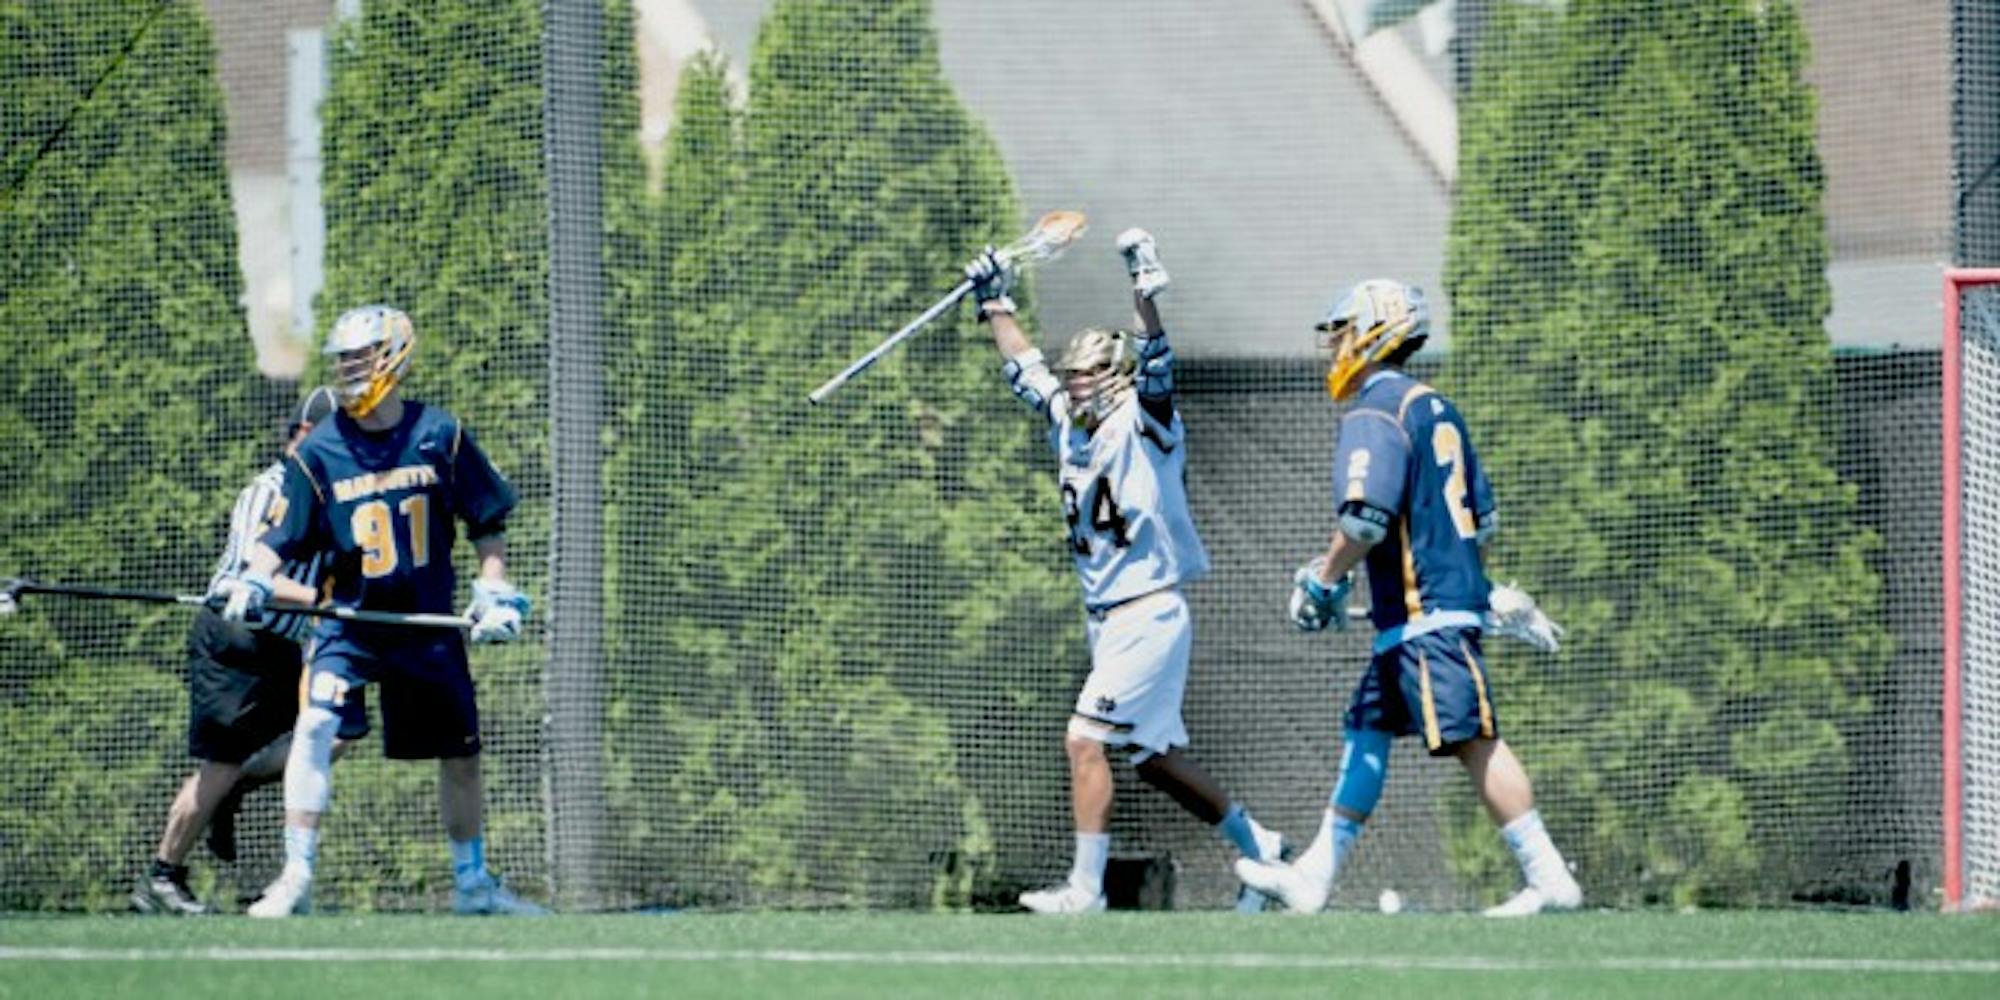 Irish junior attack Mikey Wynne celebrates an Irish goal in Notre Dame’s 15-9 win over Marquette in the first round of the NCAA tournament on May 14 at Arlotta Stadium. Wynne leads the team in goals.